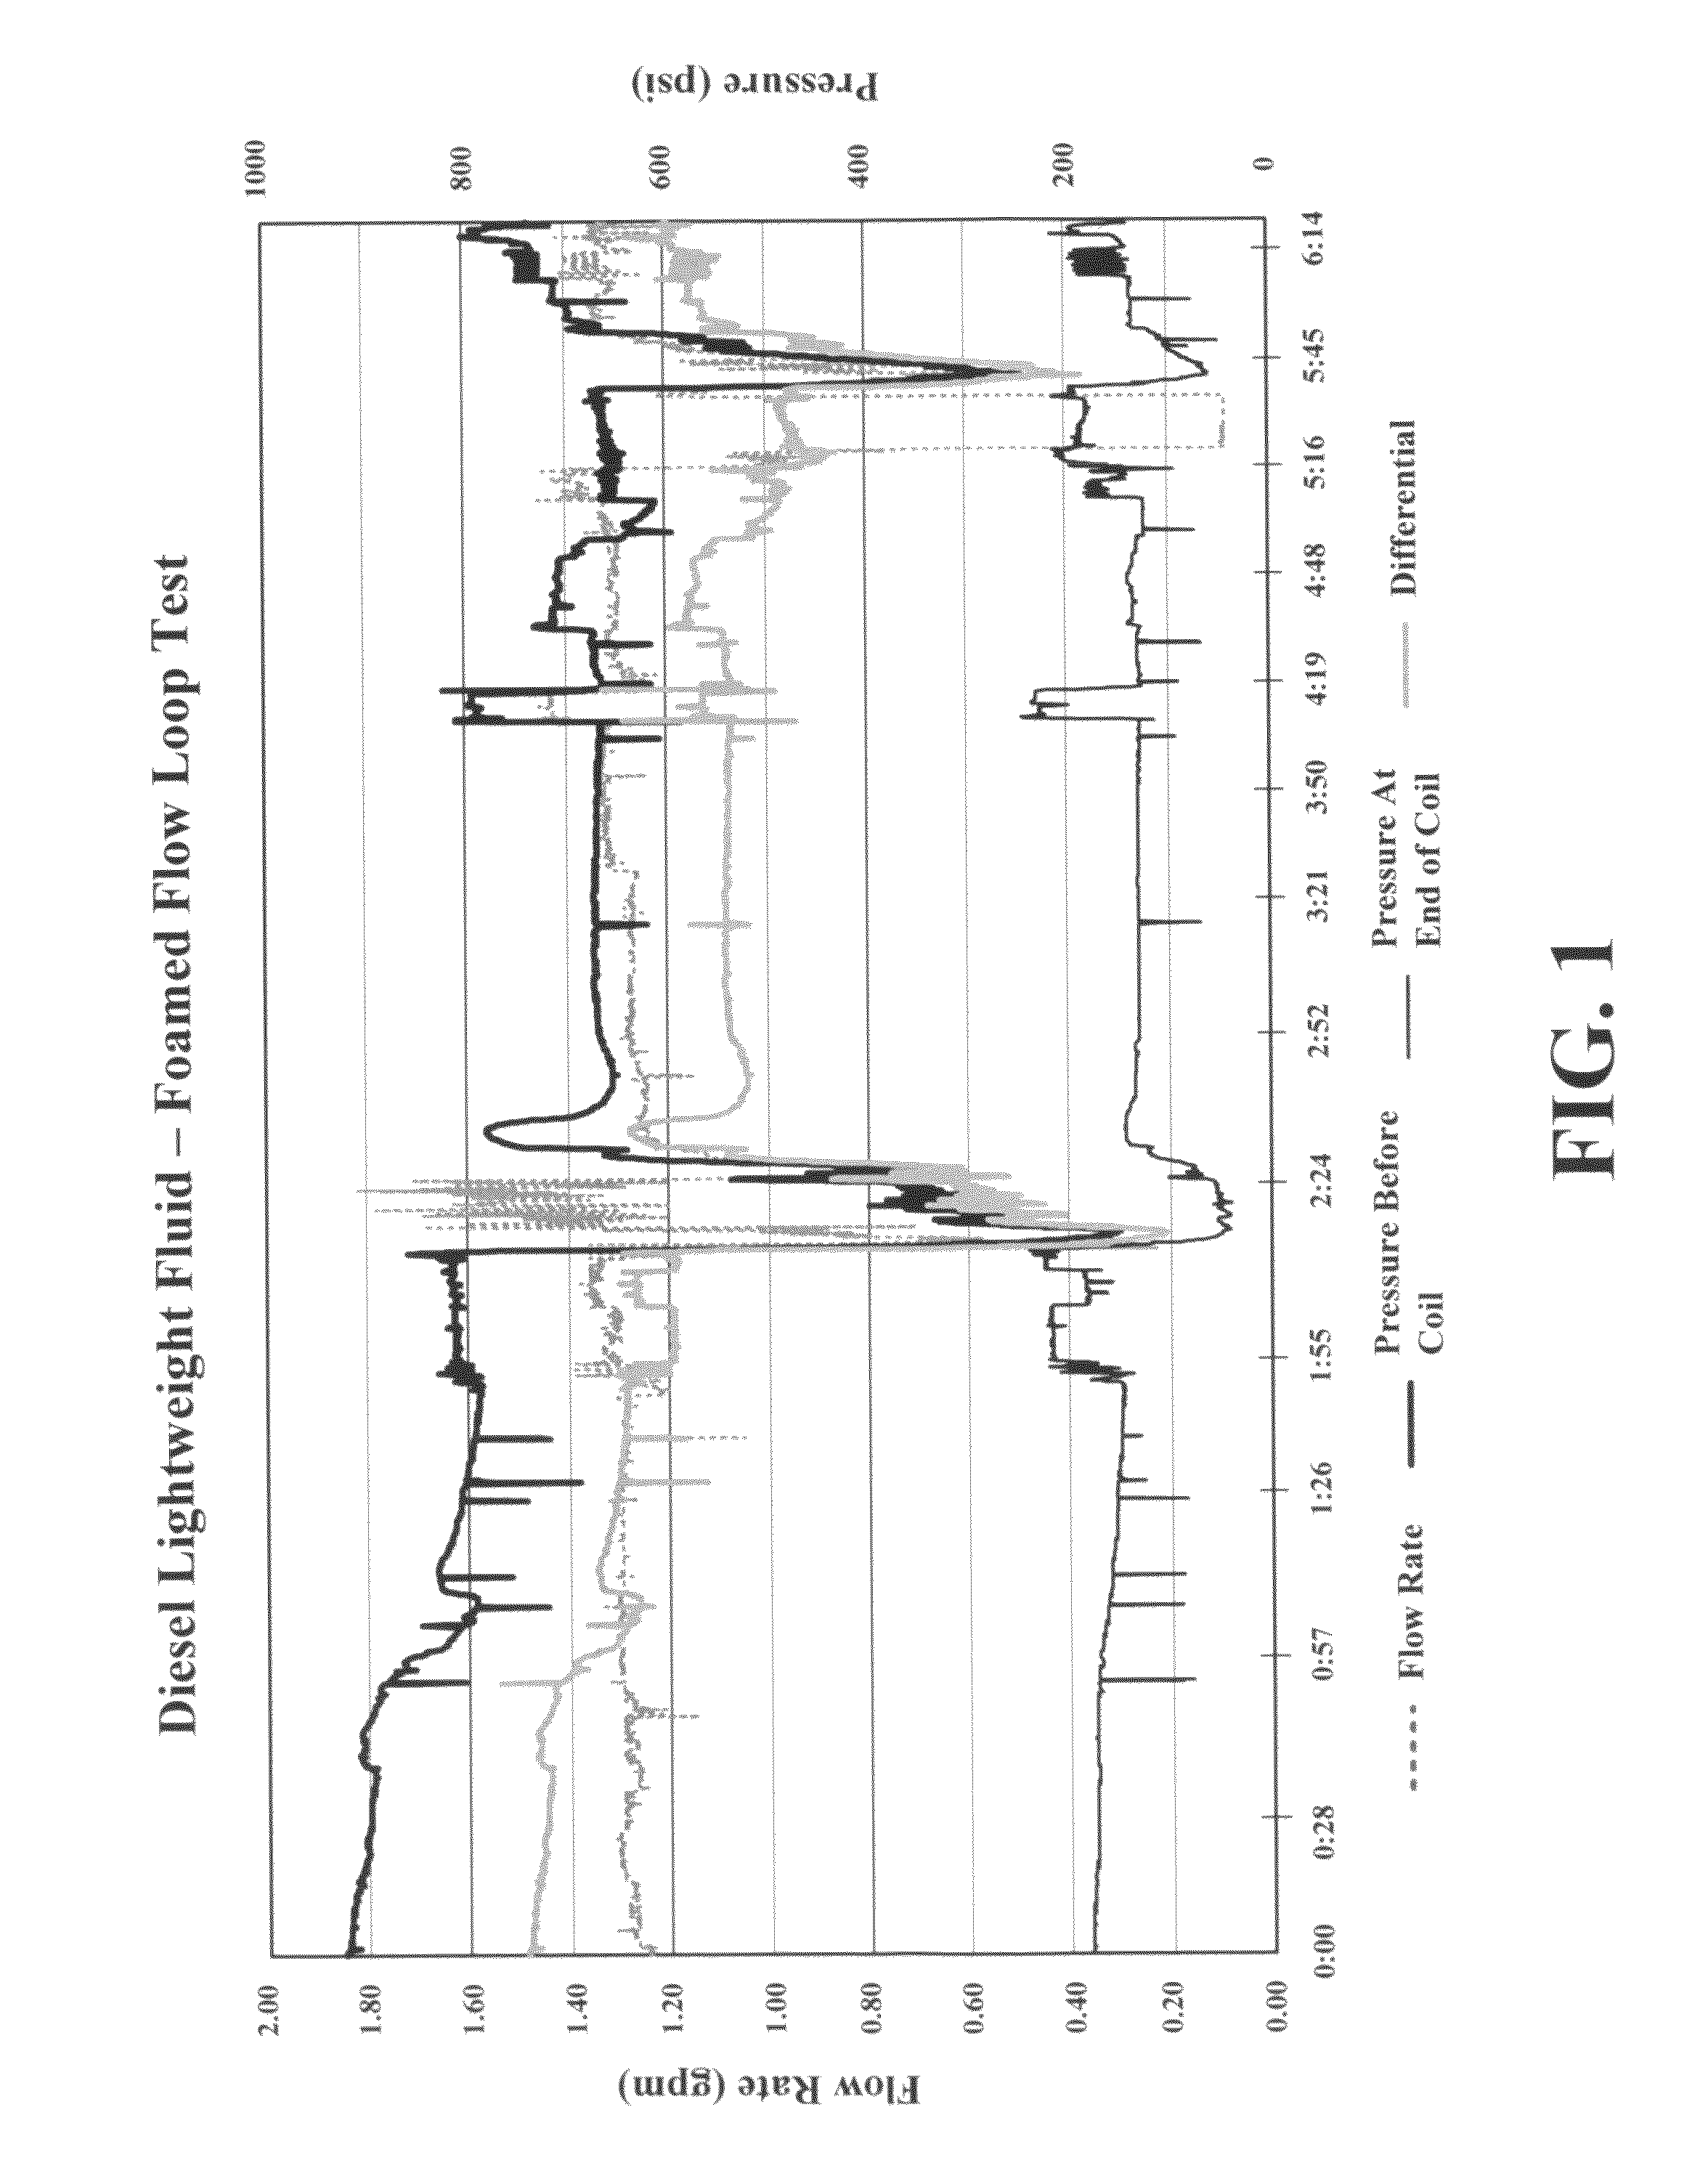 Method for foaming a hydrocarbon drilling fluid and for producing light weight hydrocarbon fluids